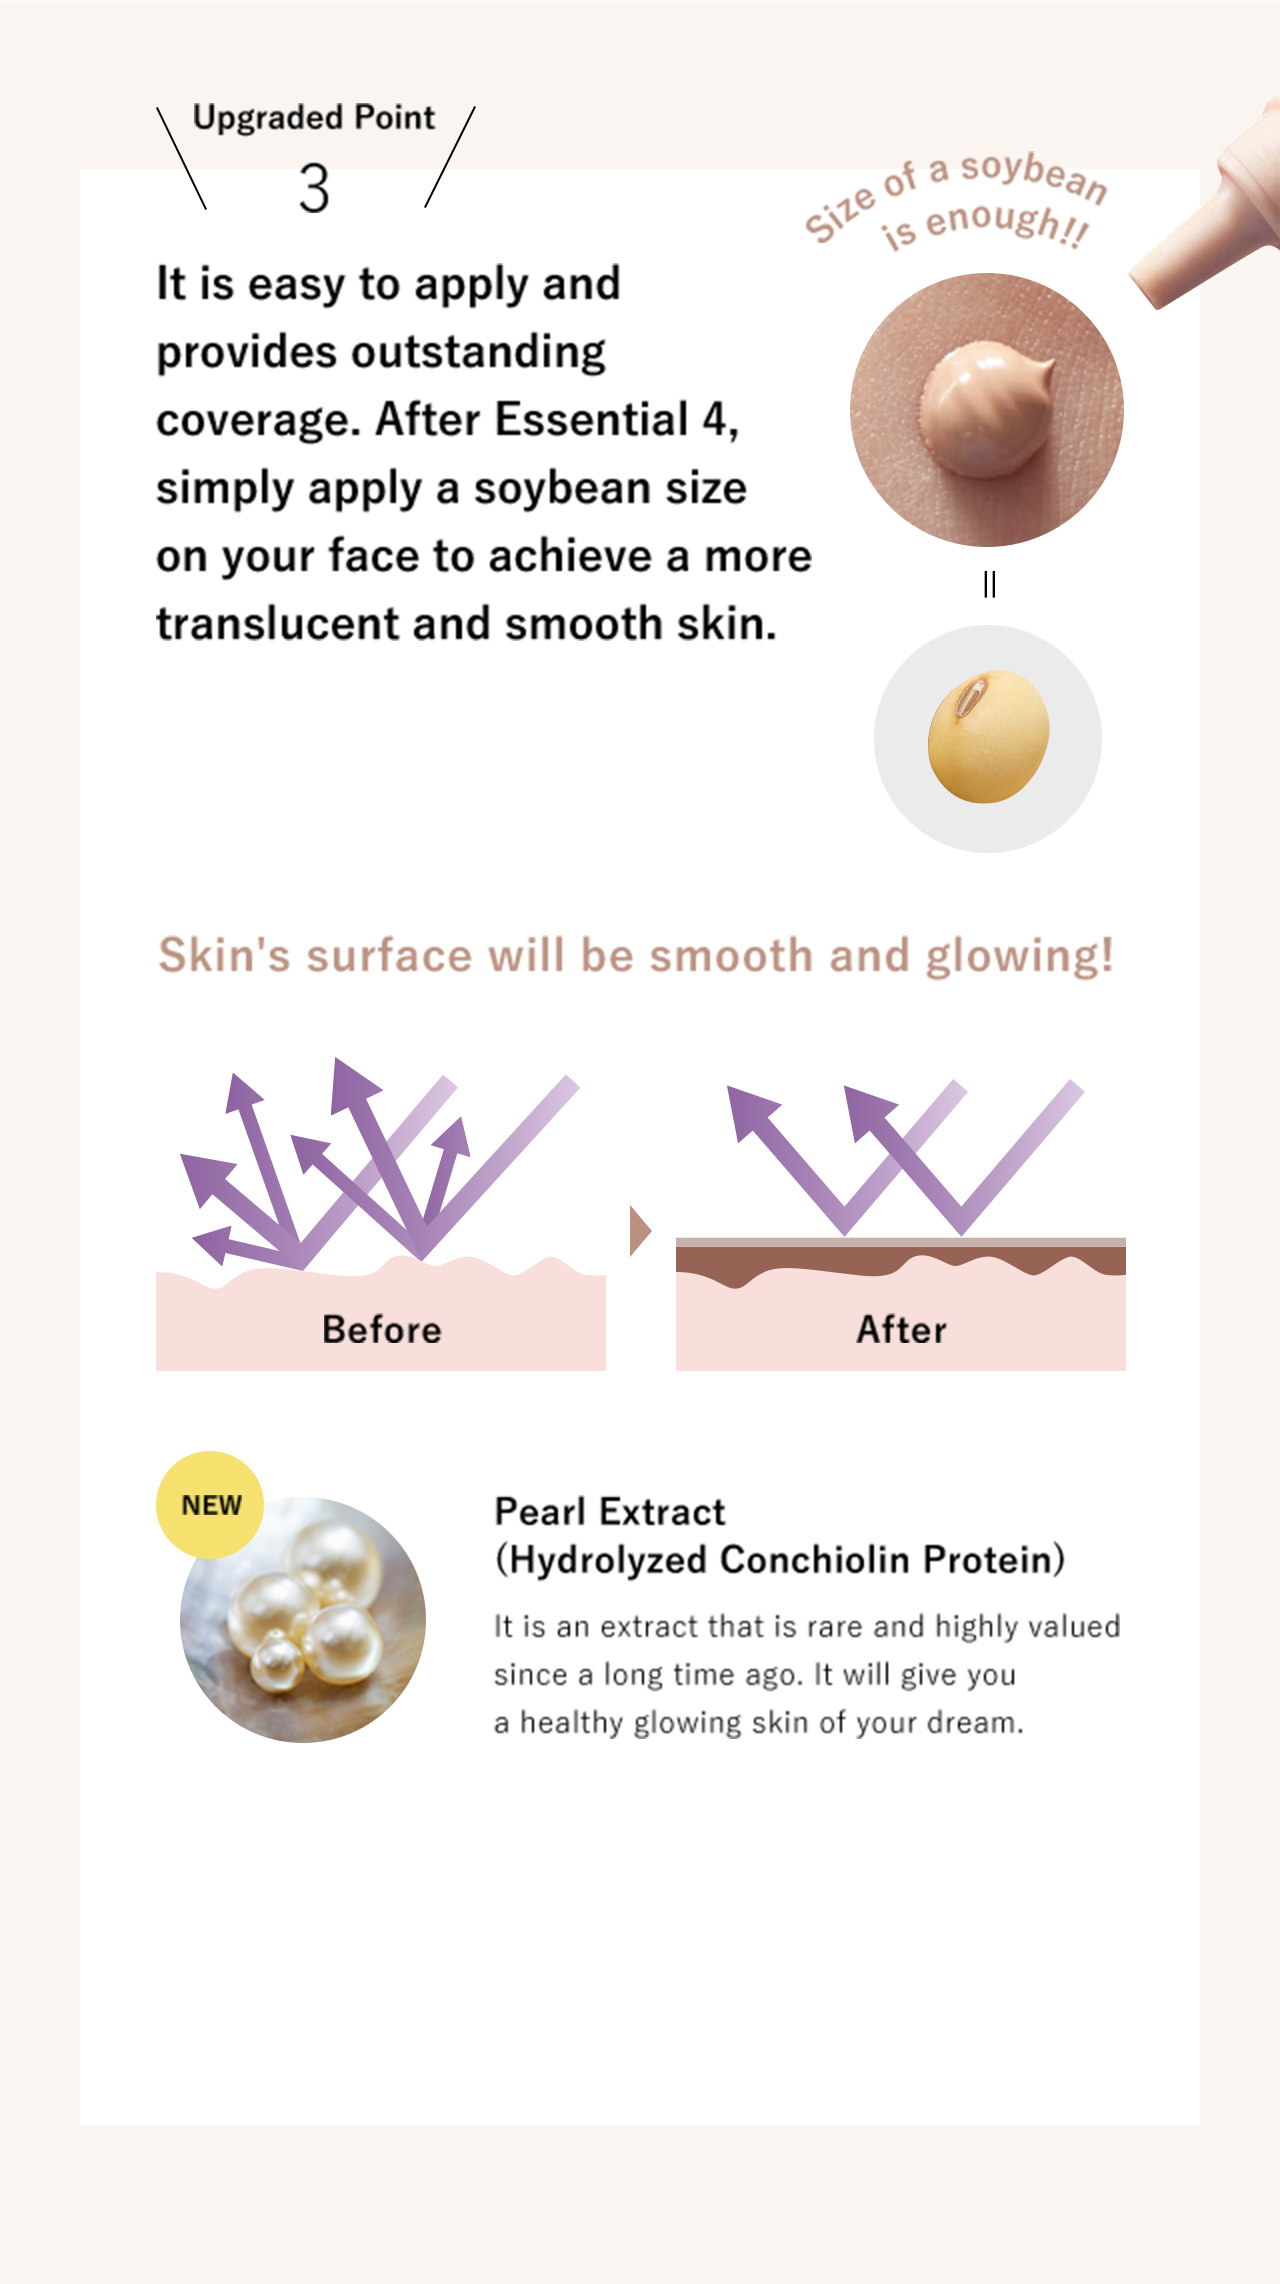 Upgraded Point 3: It is easy to apply and provides outstanding coverage. After Essential 4, simply apply a soybean size on your face to achieve a more translucent and smooth skin.